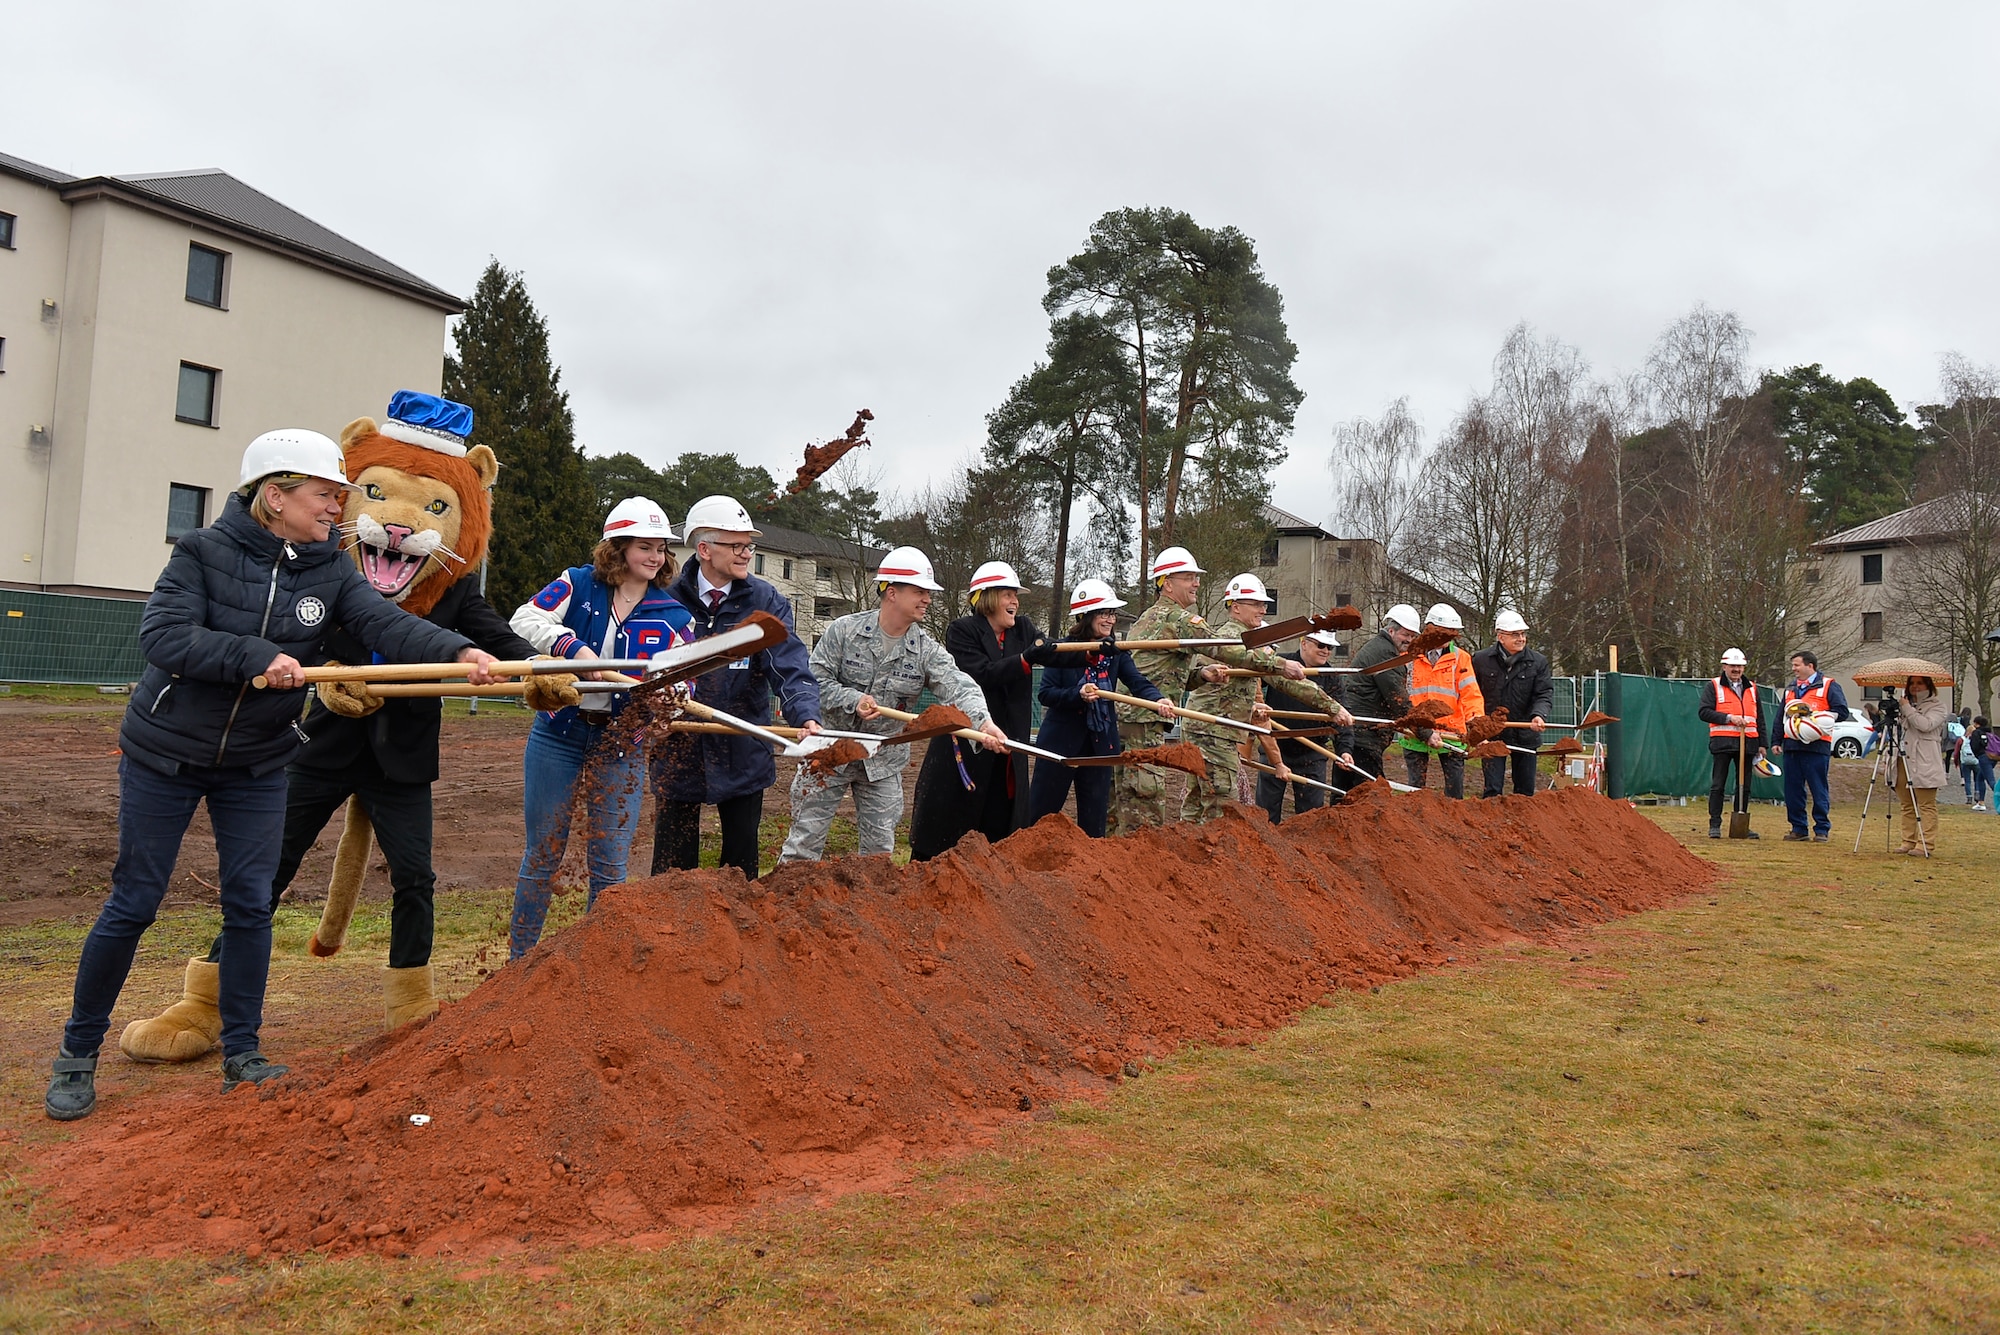 Military and civilian officials conduct a groundbreaking ceremony for a new school building on Ramstein Air Base, Germany, March 28, 2018. The Kaiserslautern Military Community has pushed to replace its old school buildings with futuristic 21st century educational facilities, which are characterized by student-centeredness, energy efficiency, and flexibility to accommodate multiple learning styles. (U.S. Air Force photo by Senior Airman Joshua Magbanua)